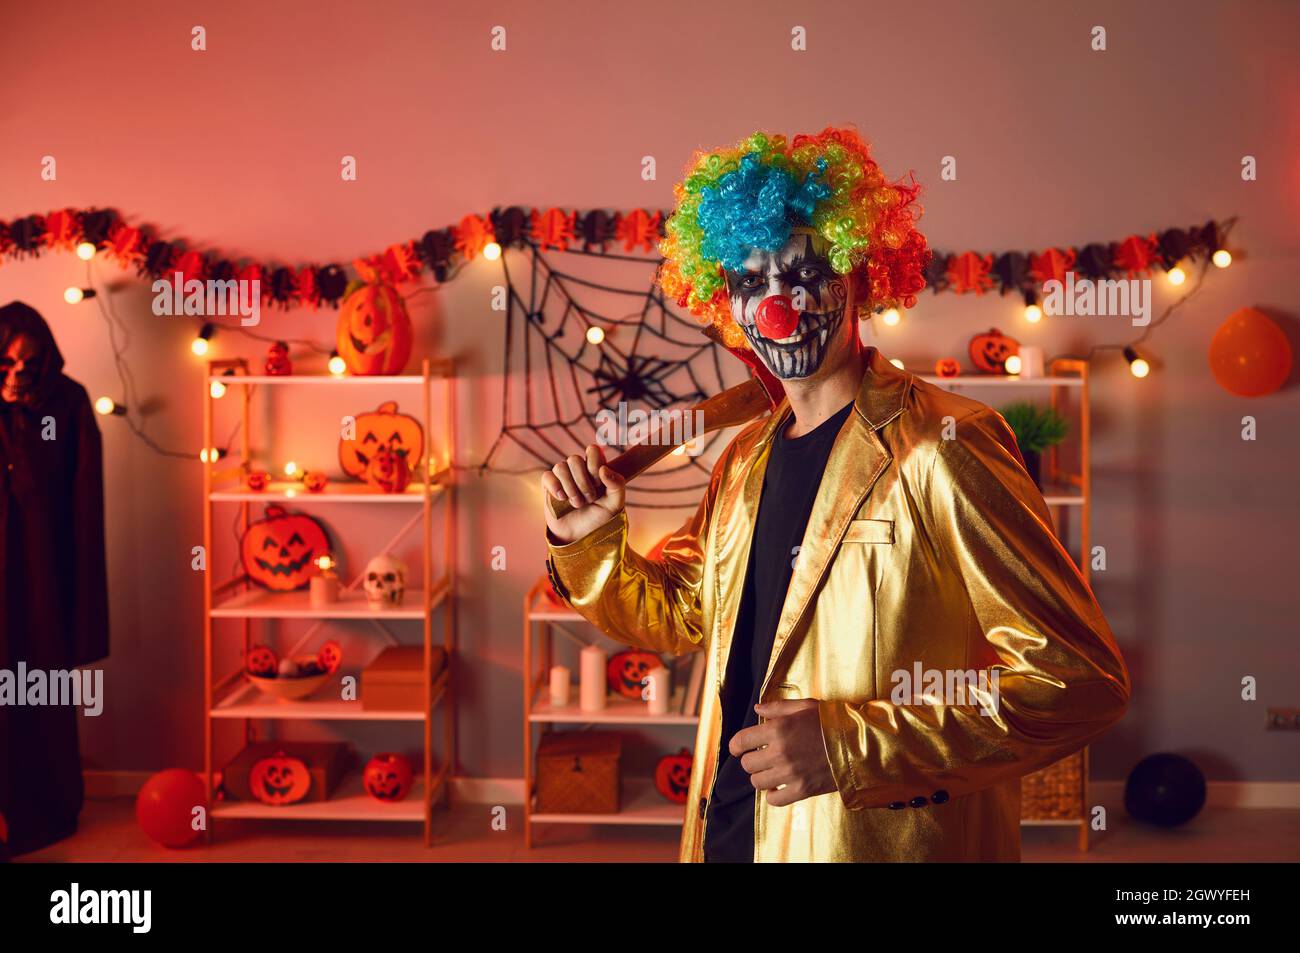 Portrait of adult man dressed up as creepy evil clown with axe at Halloween party Stock Photo